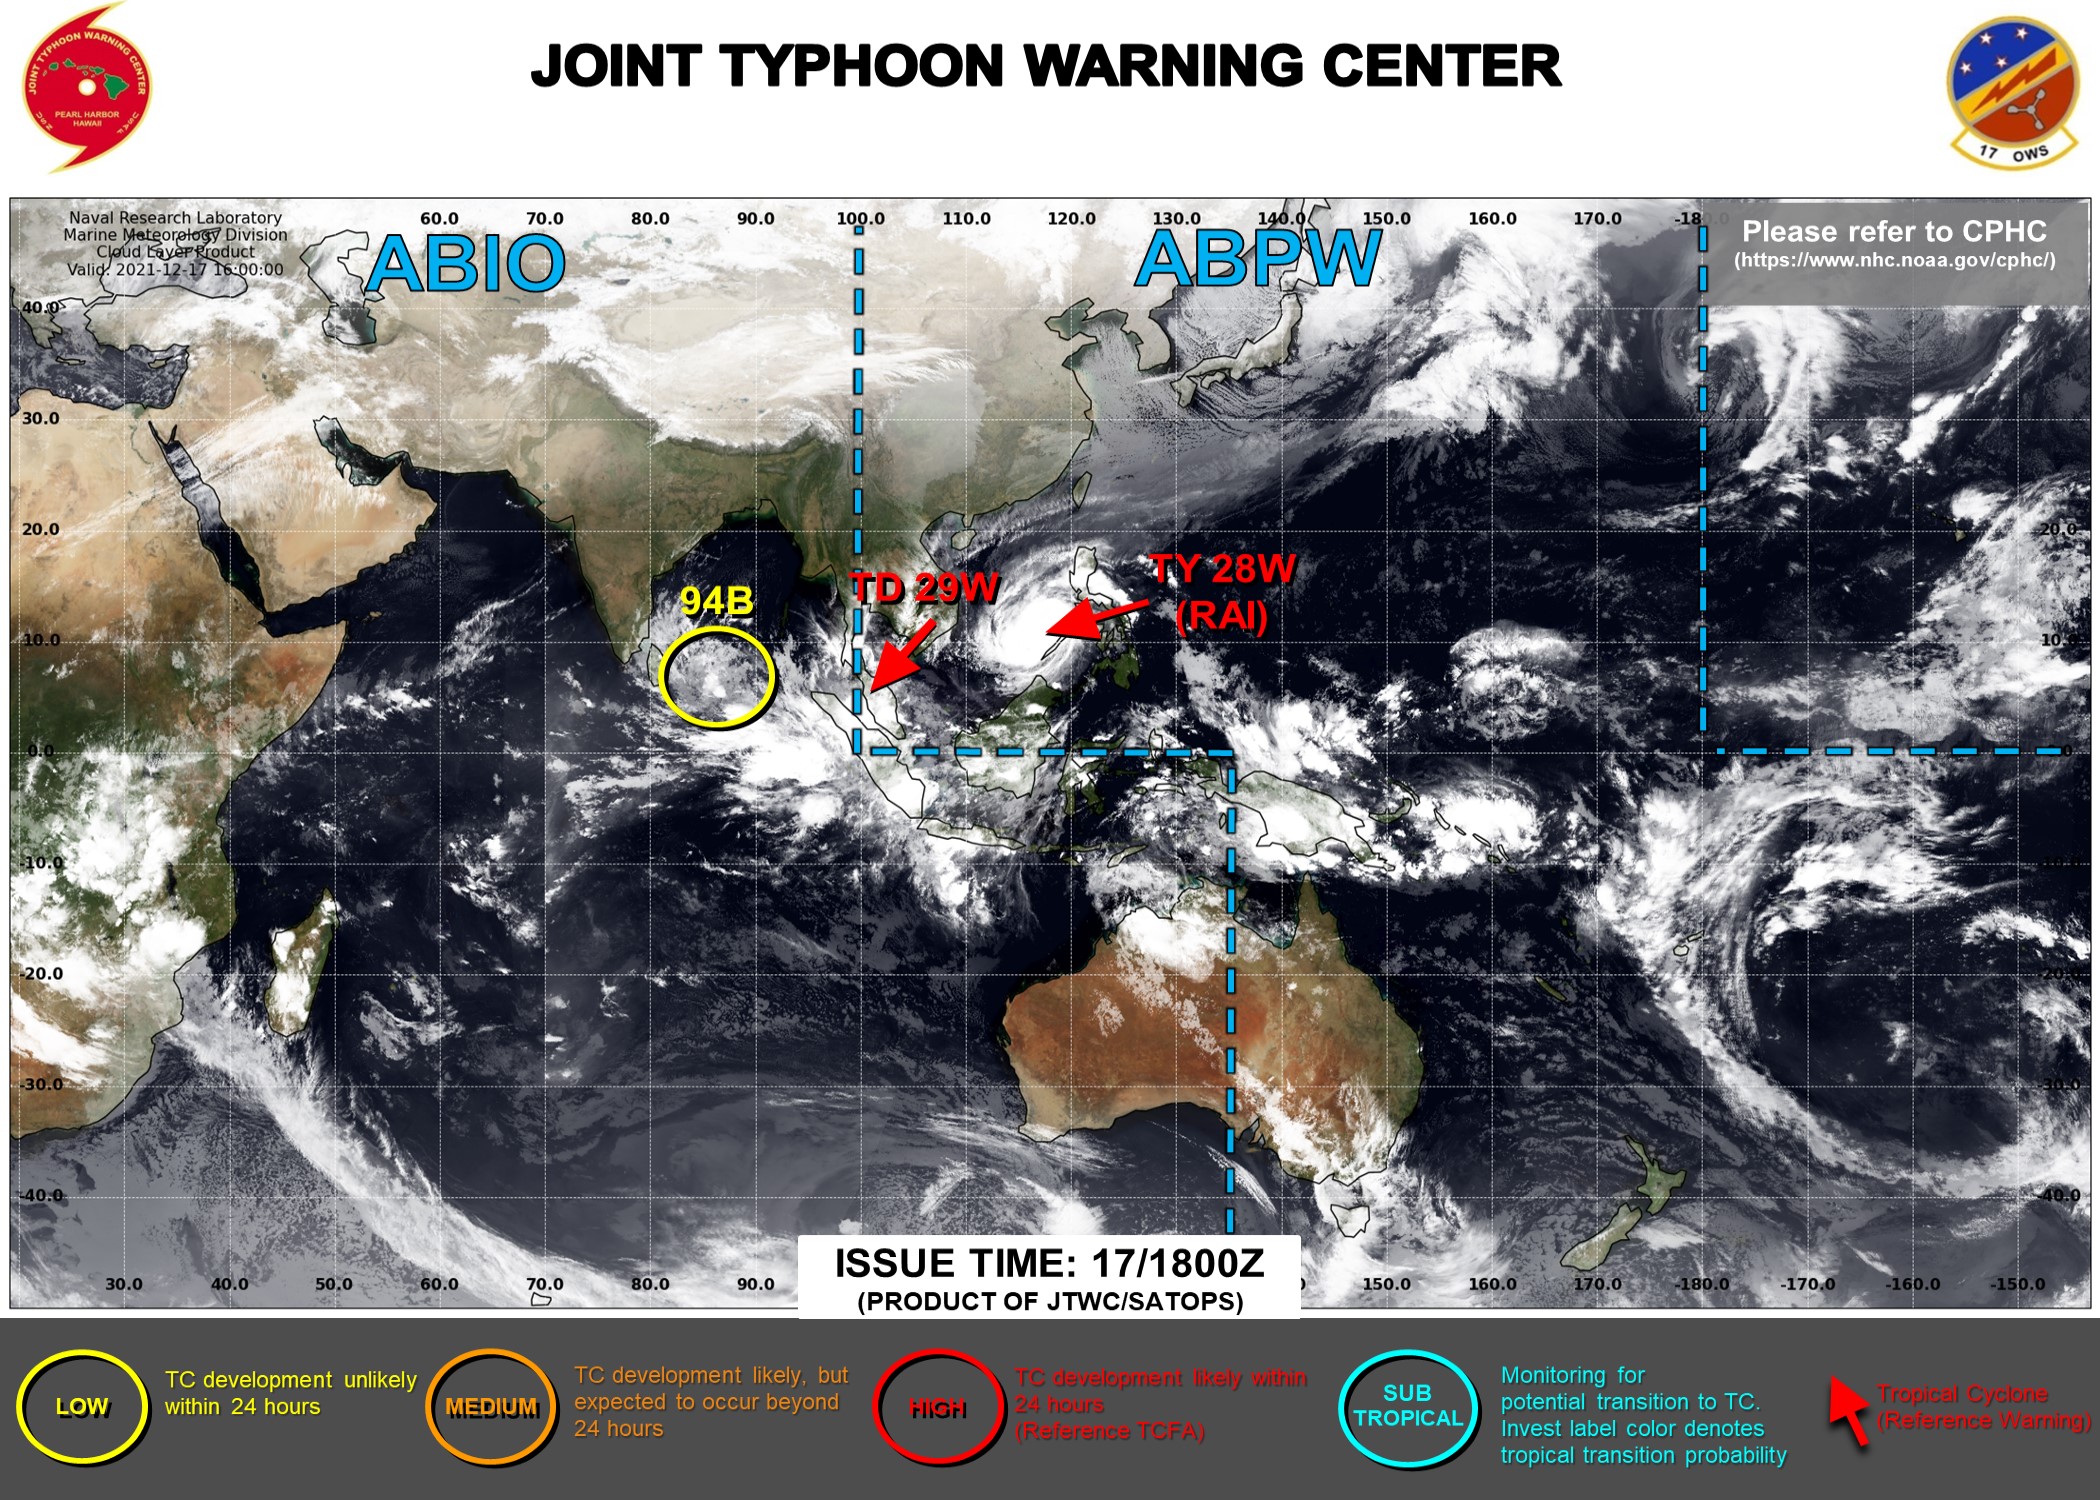 JTWC IS ISSUING 6HOURLY WARNINGS AND 3HOURLY SATELLITE BULLETINS ON 28W(RAI). 3HOURLY SATELLITE BULLETINS WERE DISCONTINUED AT 17/1430UTC ON 29W.